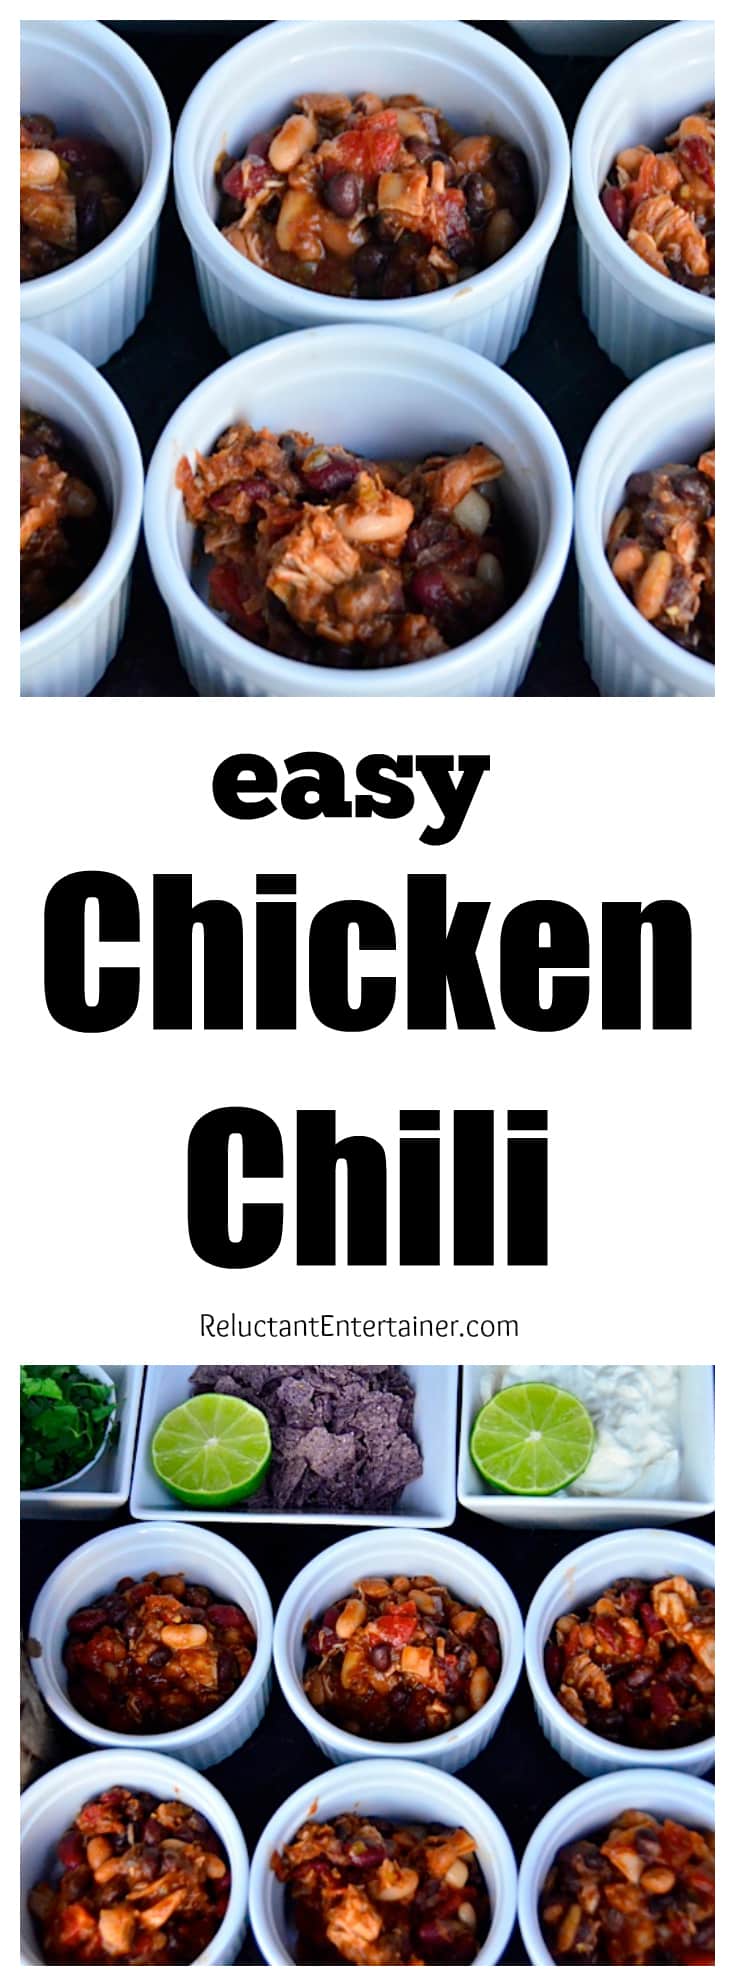 Easy Chicken Chili Recipe at ReluctantEntertainer.com